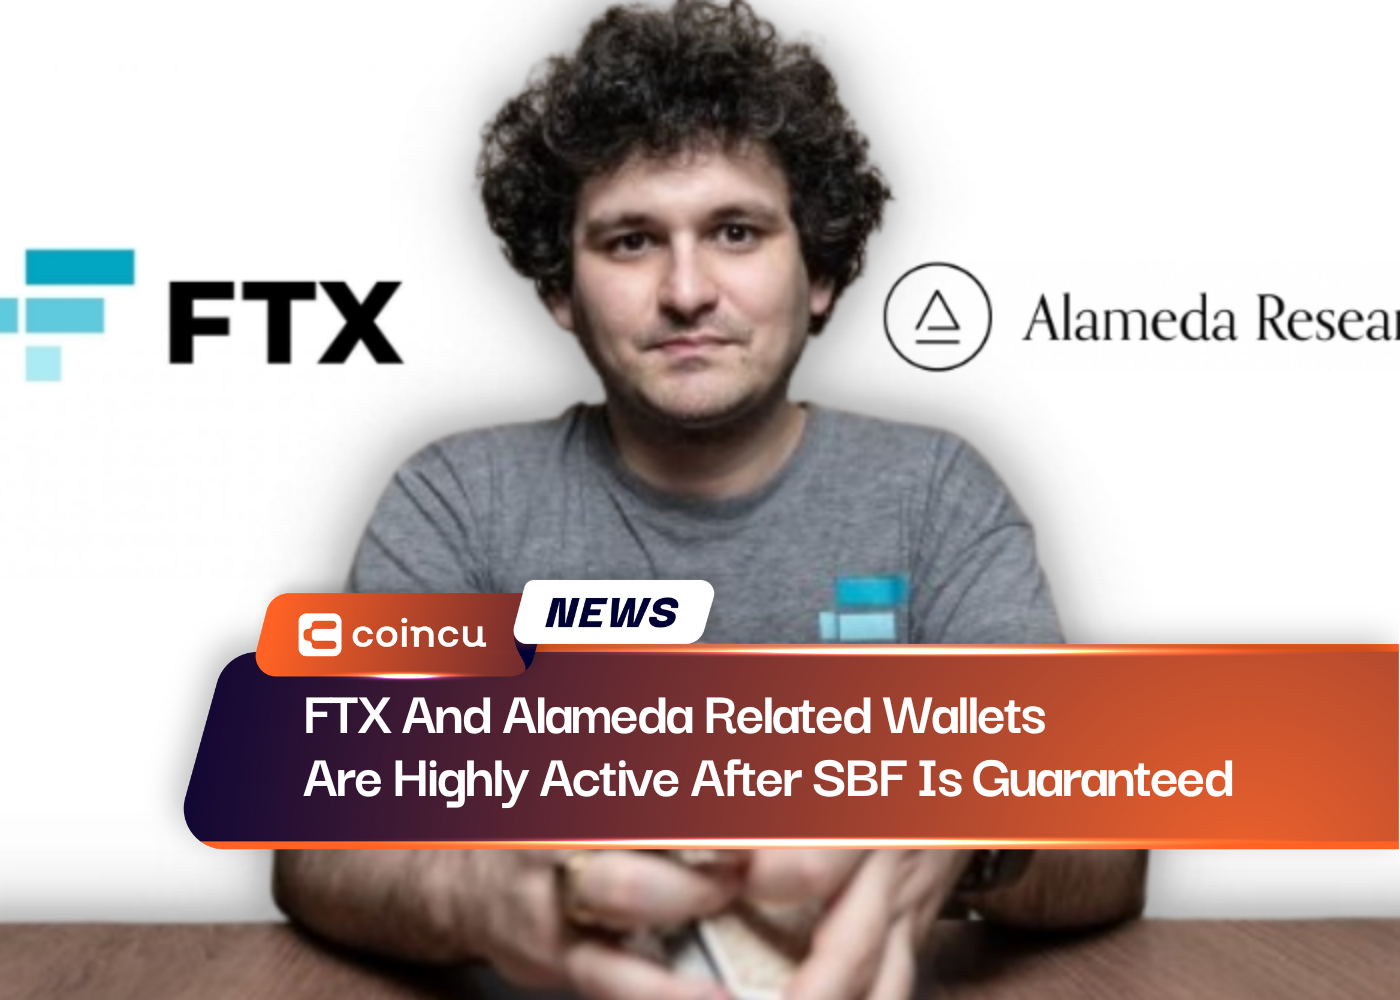 FTX And Alameda Related Wallets Are Highly Active After SBF Is Guaranteed